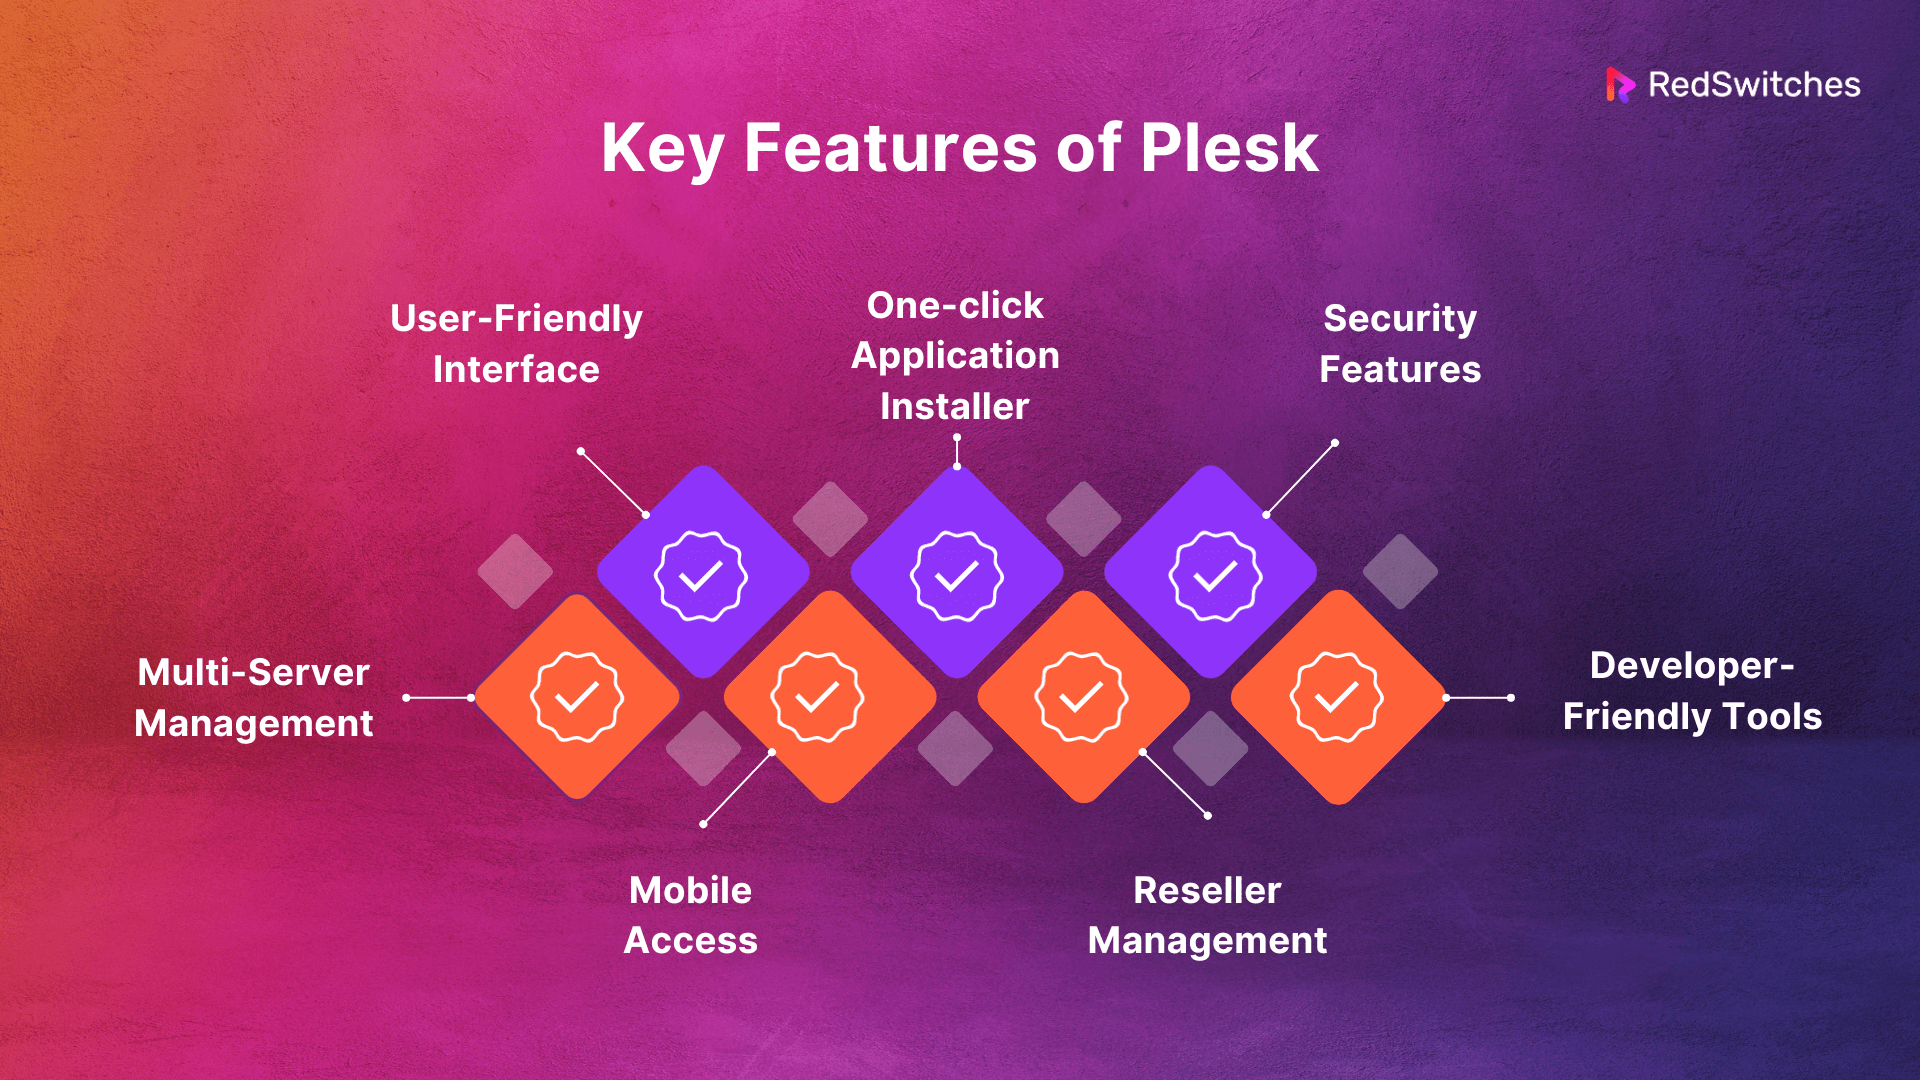 Key Features of Plesk